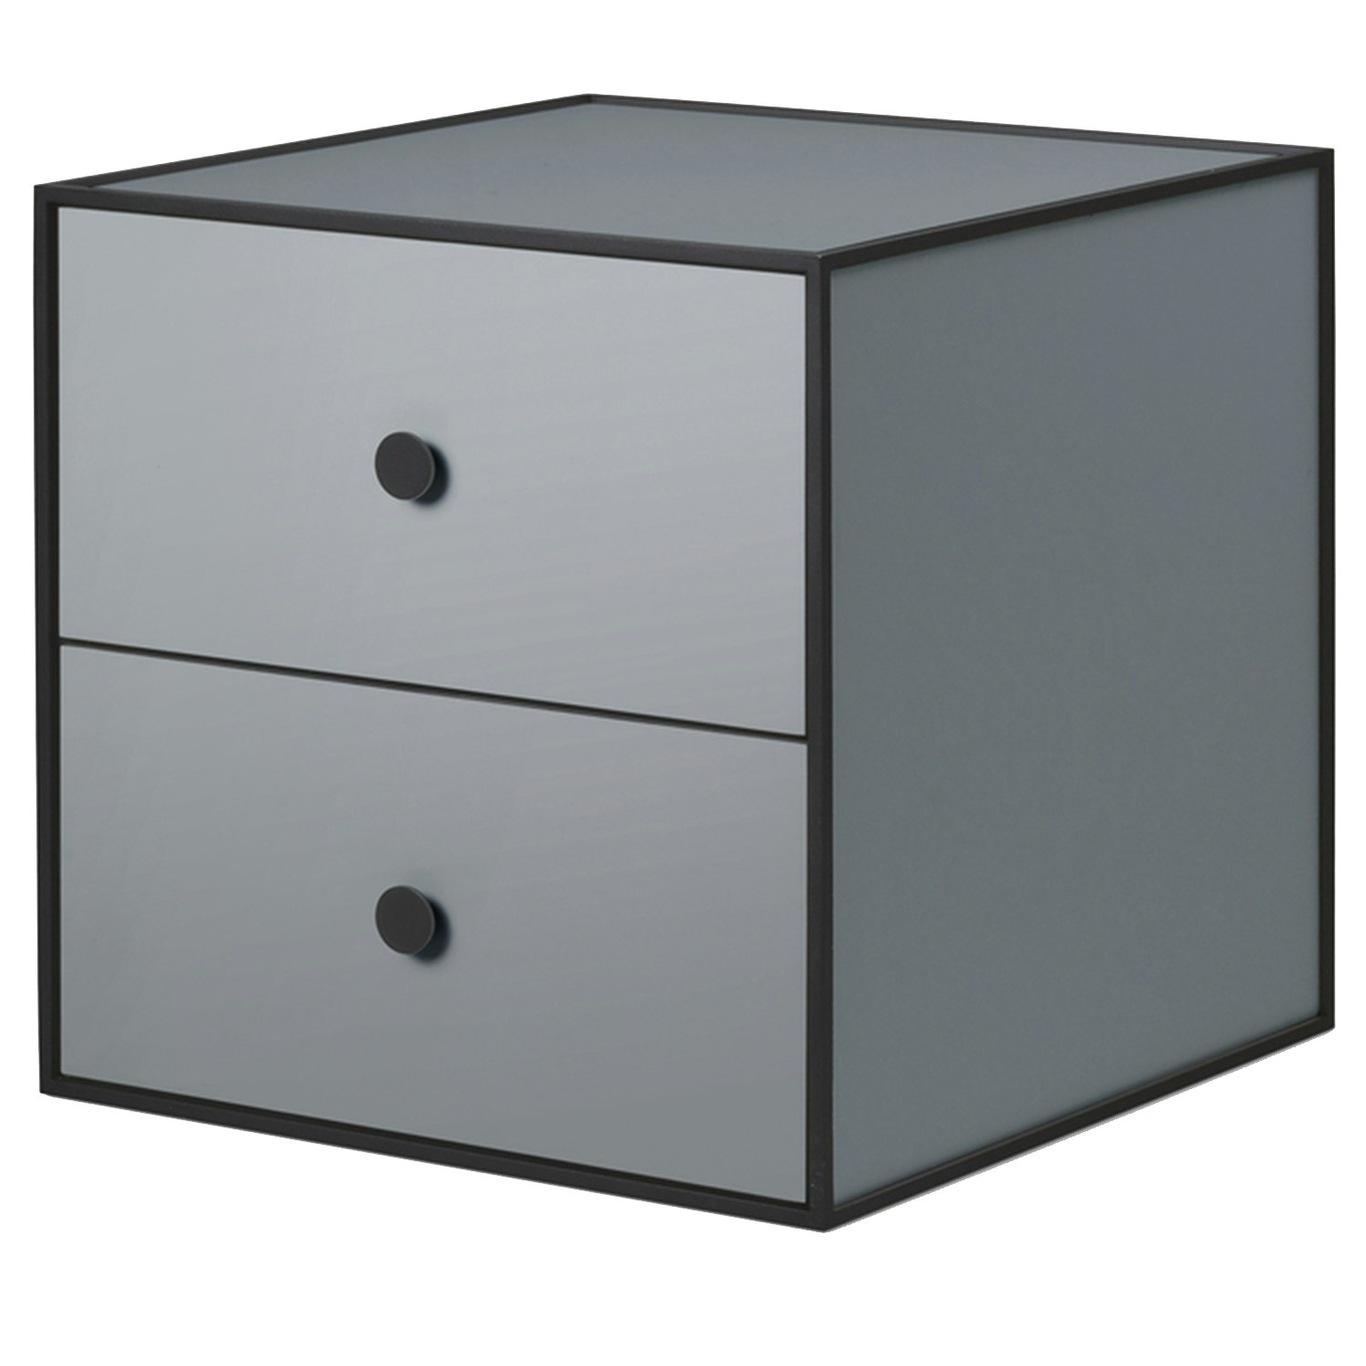 Frame 35 Bedside Table With 2 Drawers, Dark Grey